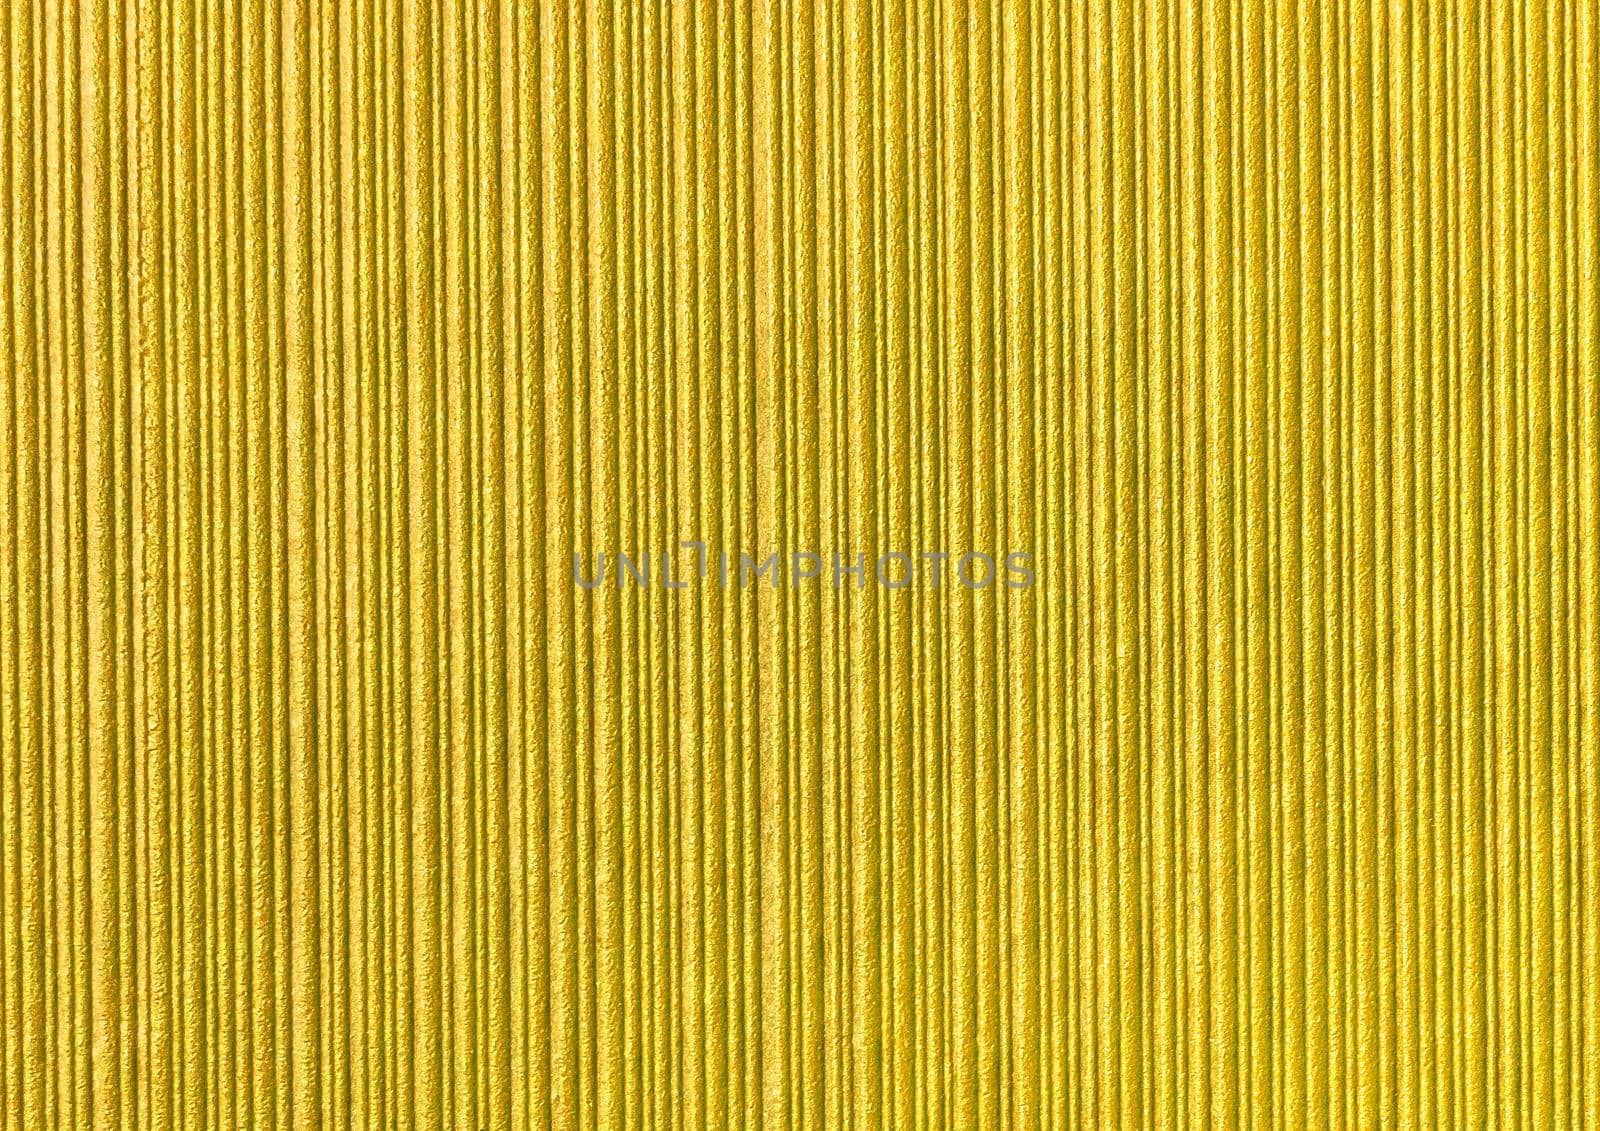 Yellow abstract striped pattern wallpaper background, gold paper texture with vertical lines.